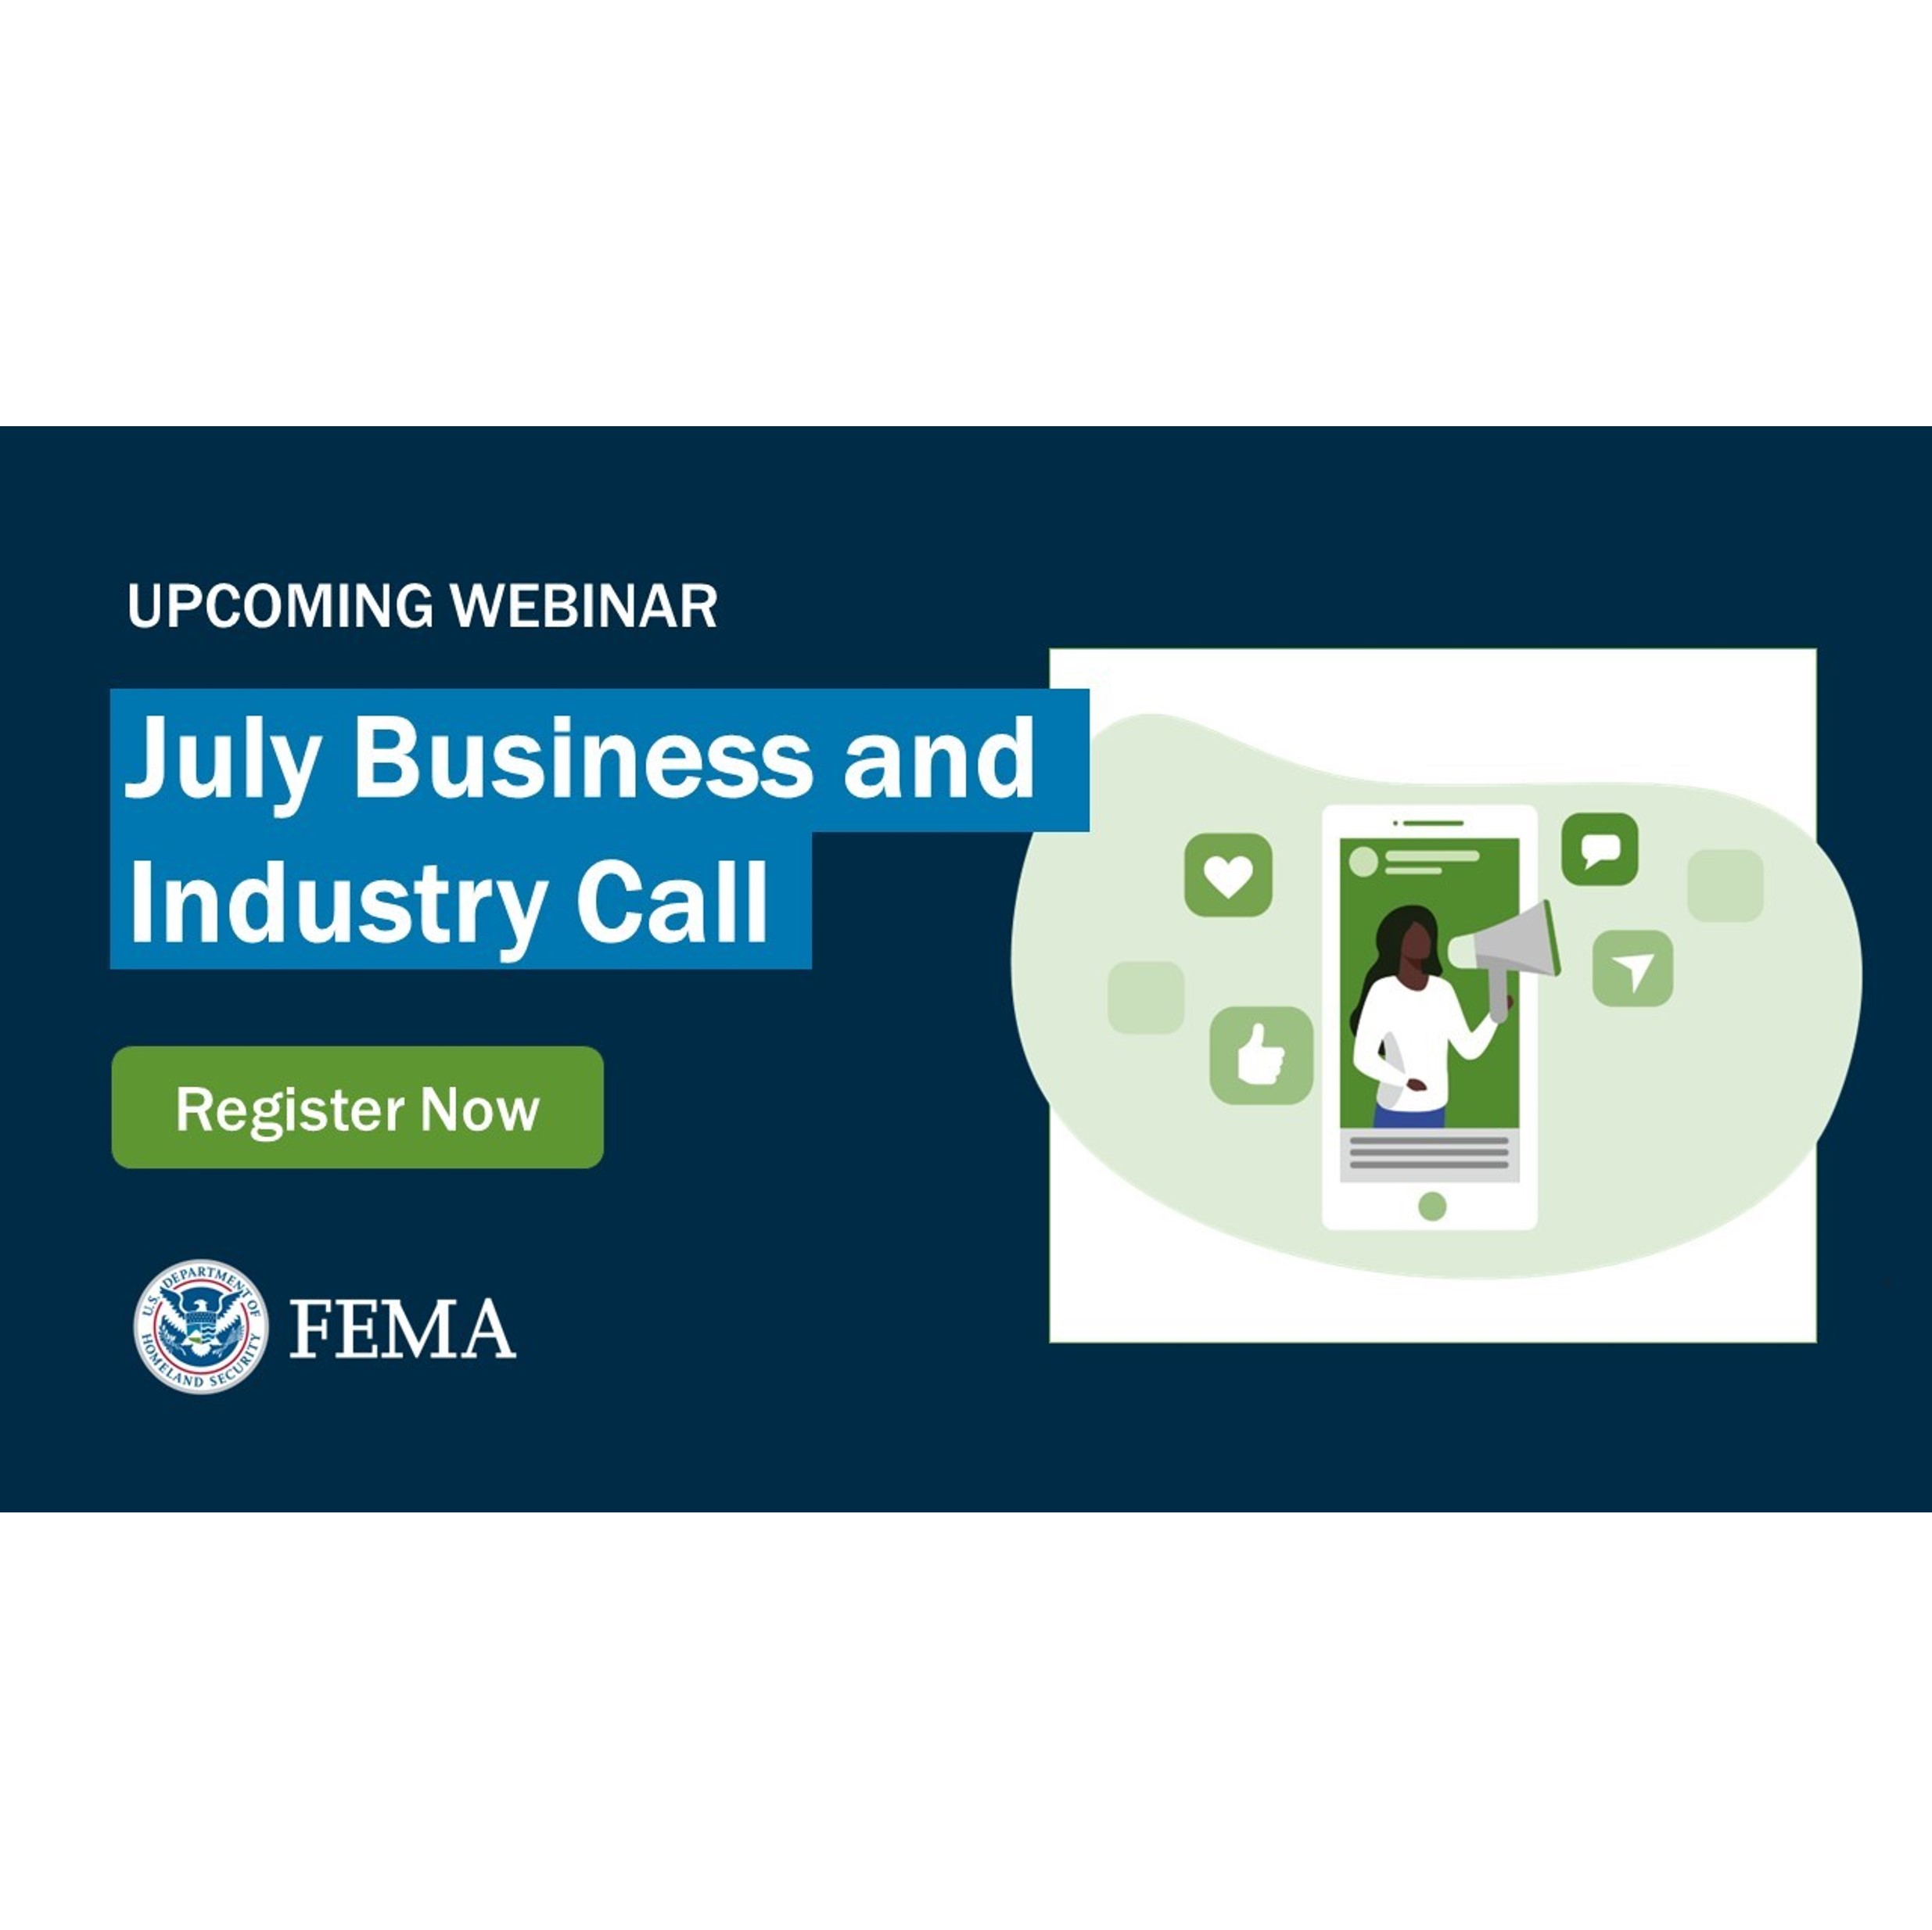 Upcoming Webinar: July Business and Industry Call